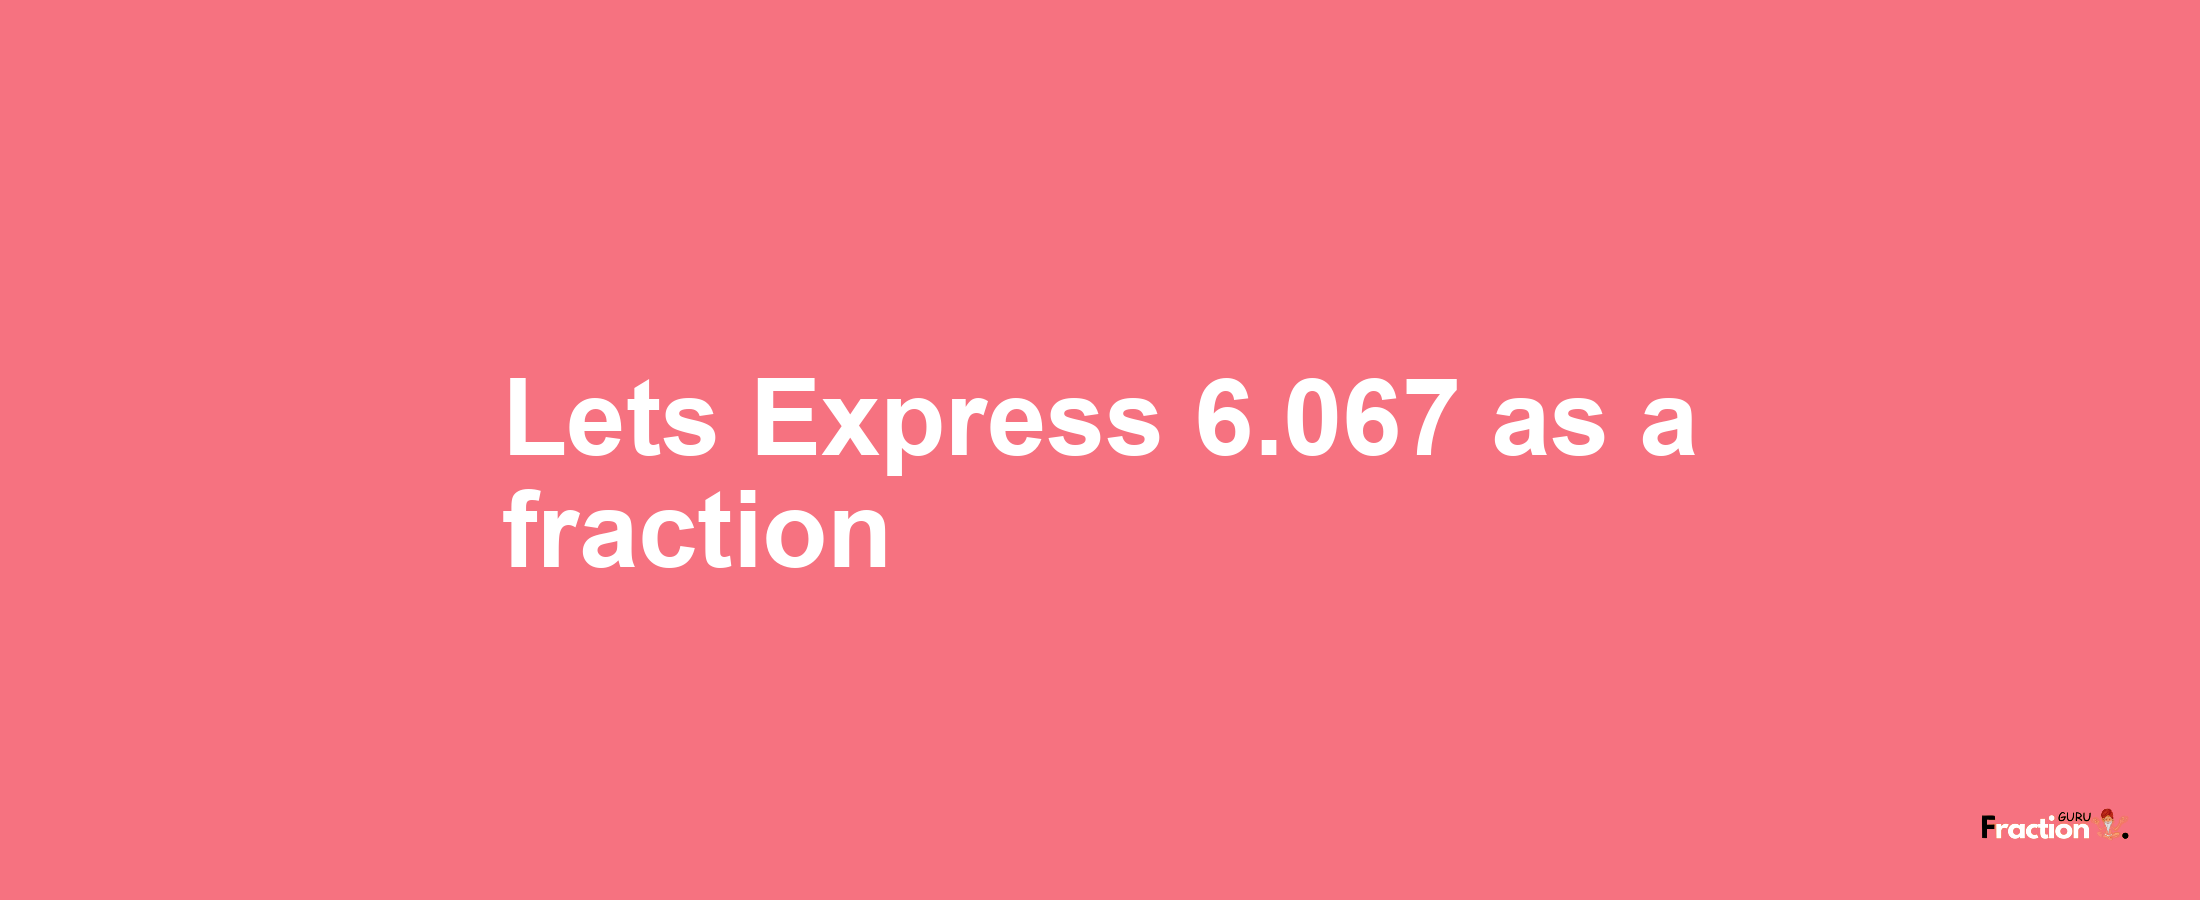 Lets Express 6.067 as afraction